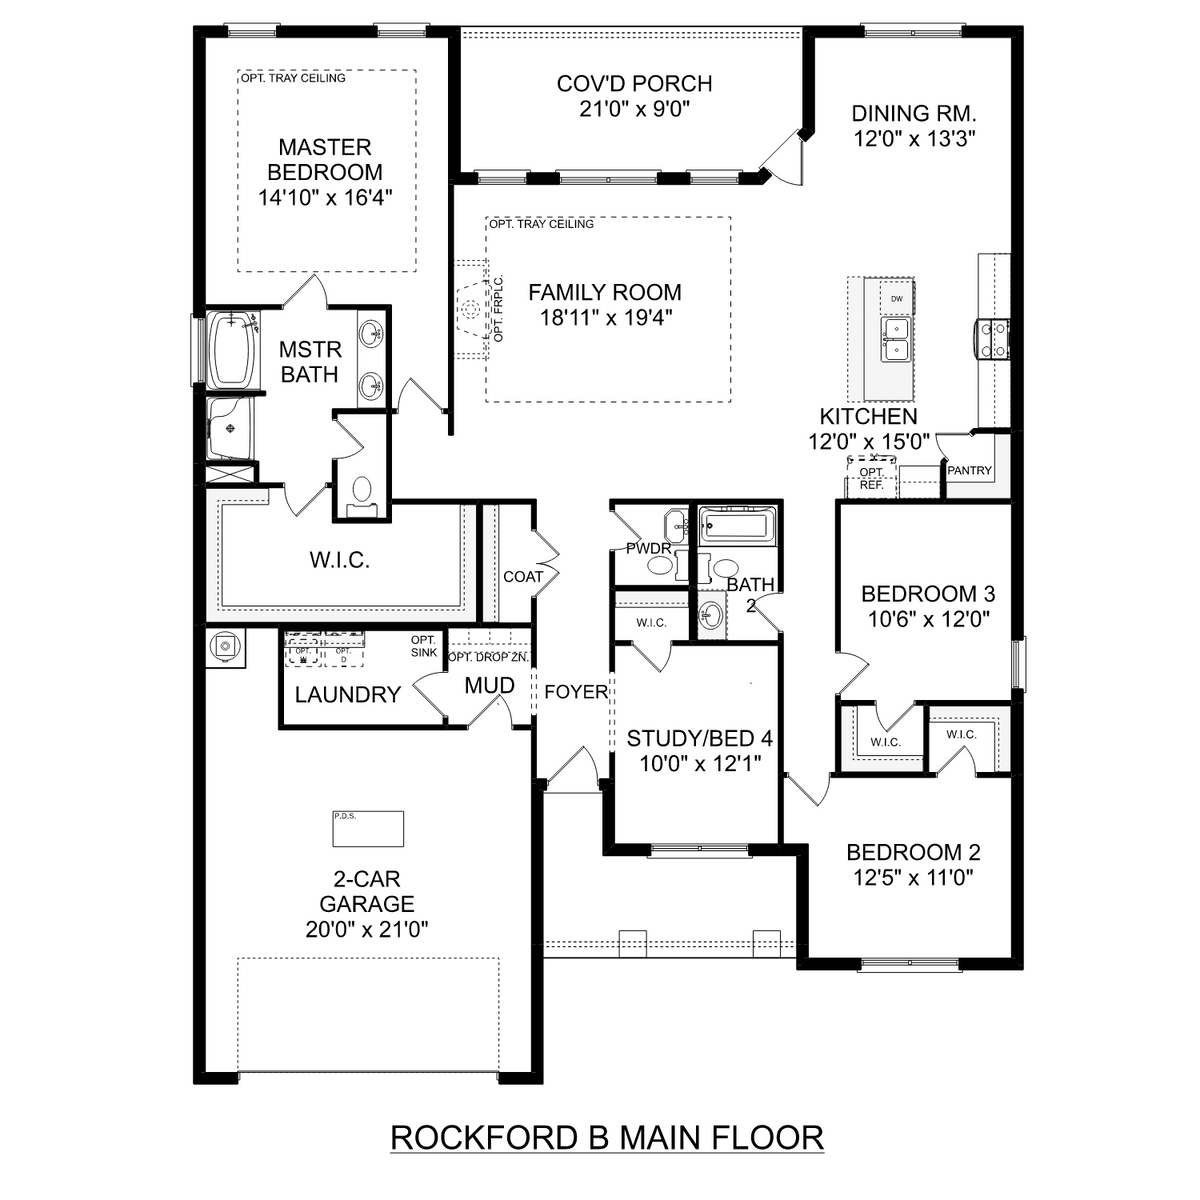 1 - The Rockford B buildable floor plan layout in Davidson Homes' Creekside community.